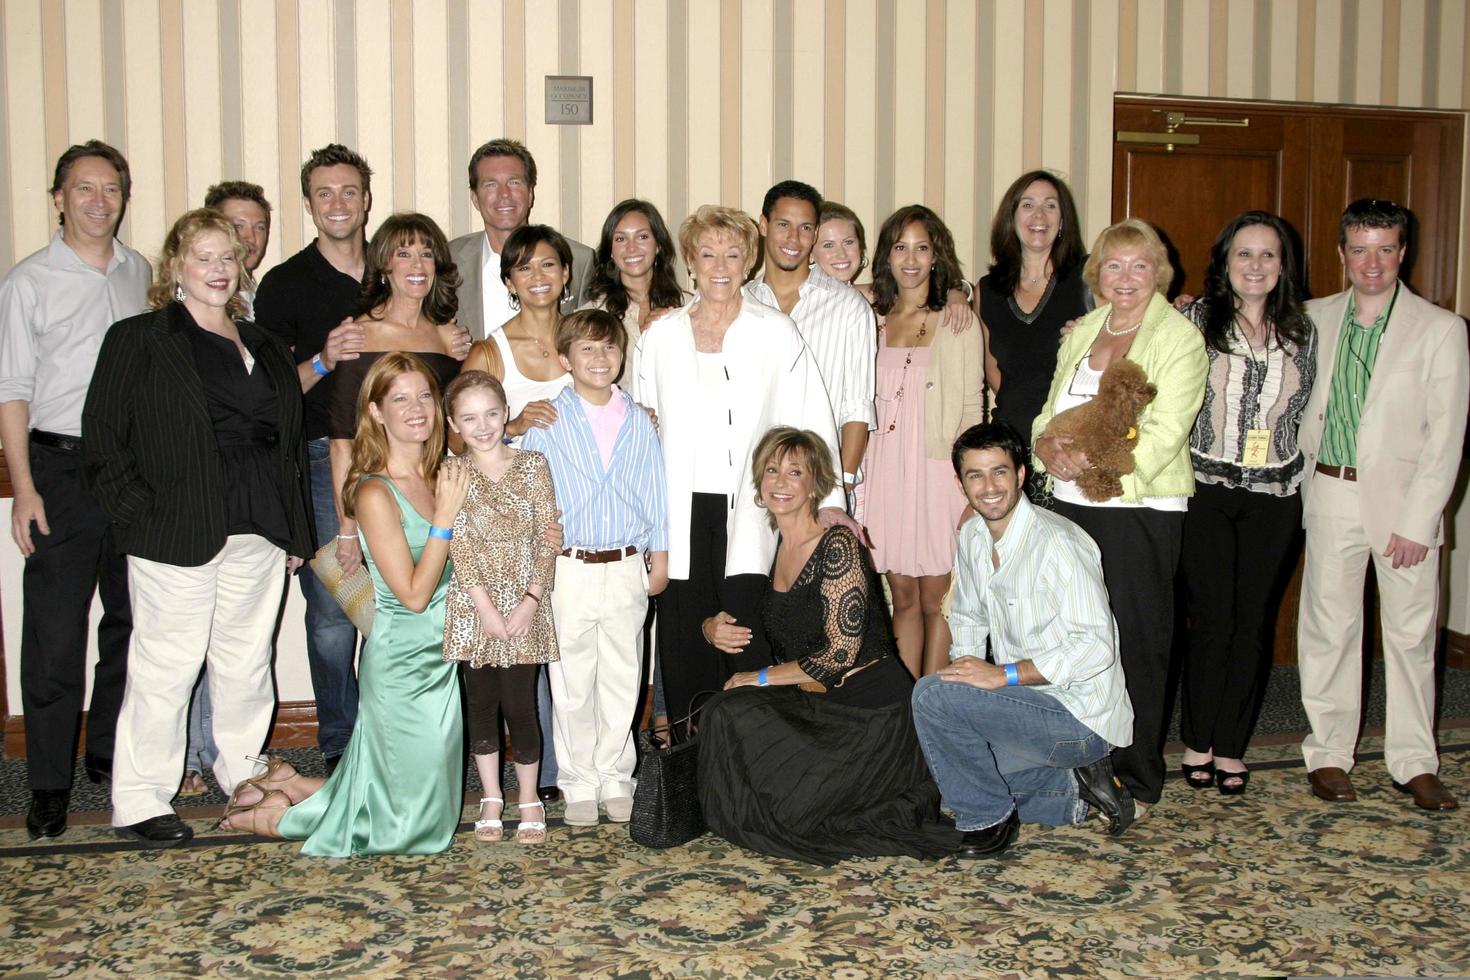 The Young and the Restless CastThe Young and the Restless Fan LuncheonUniversal Sheraton HotelLos Angeles  CAAug 26 20072007 photo